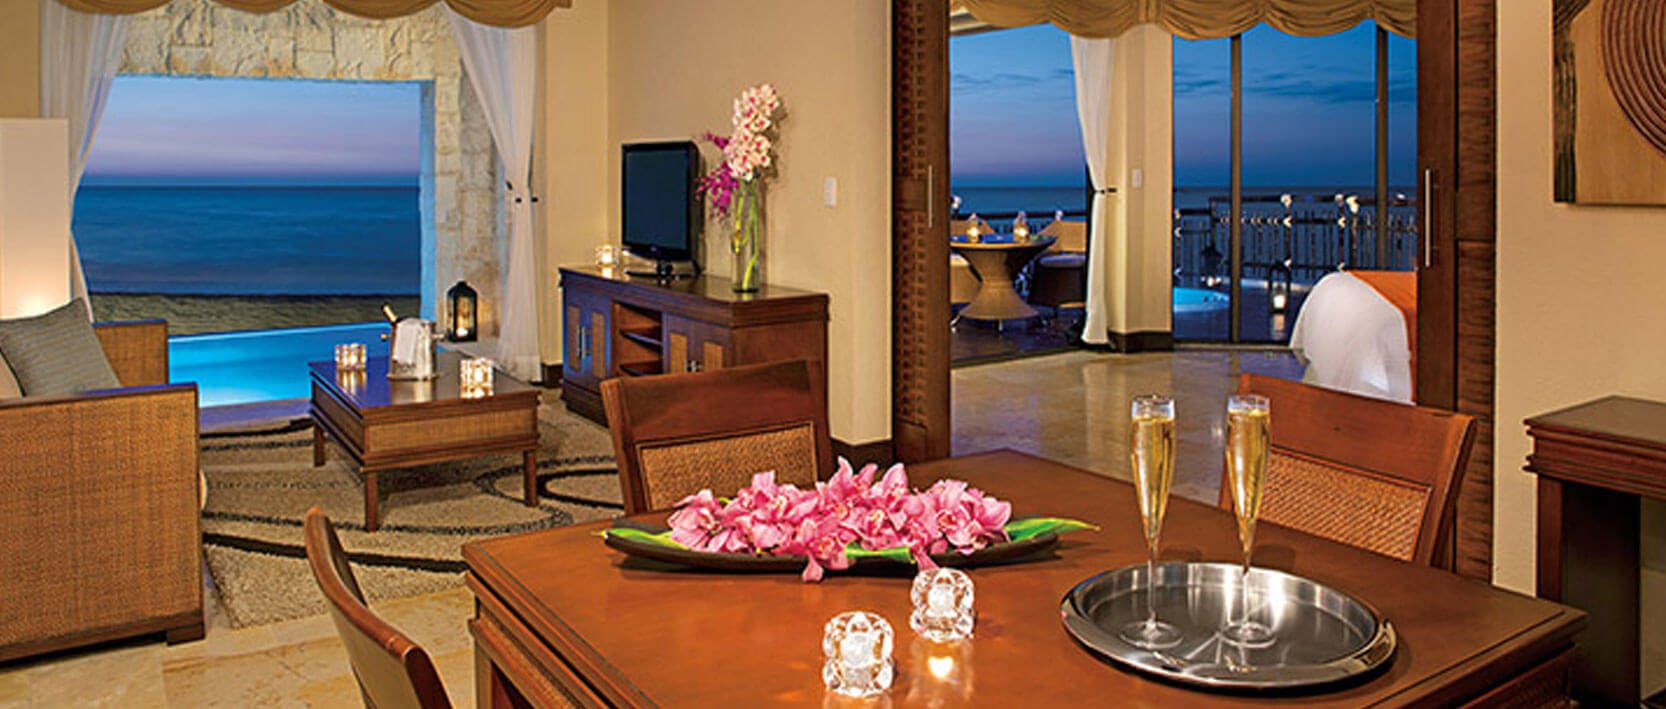 Dreams Riviera Cancun Resort Accommodations - Preferred Club Ocean Front Governor Suite